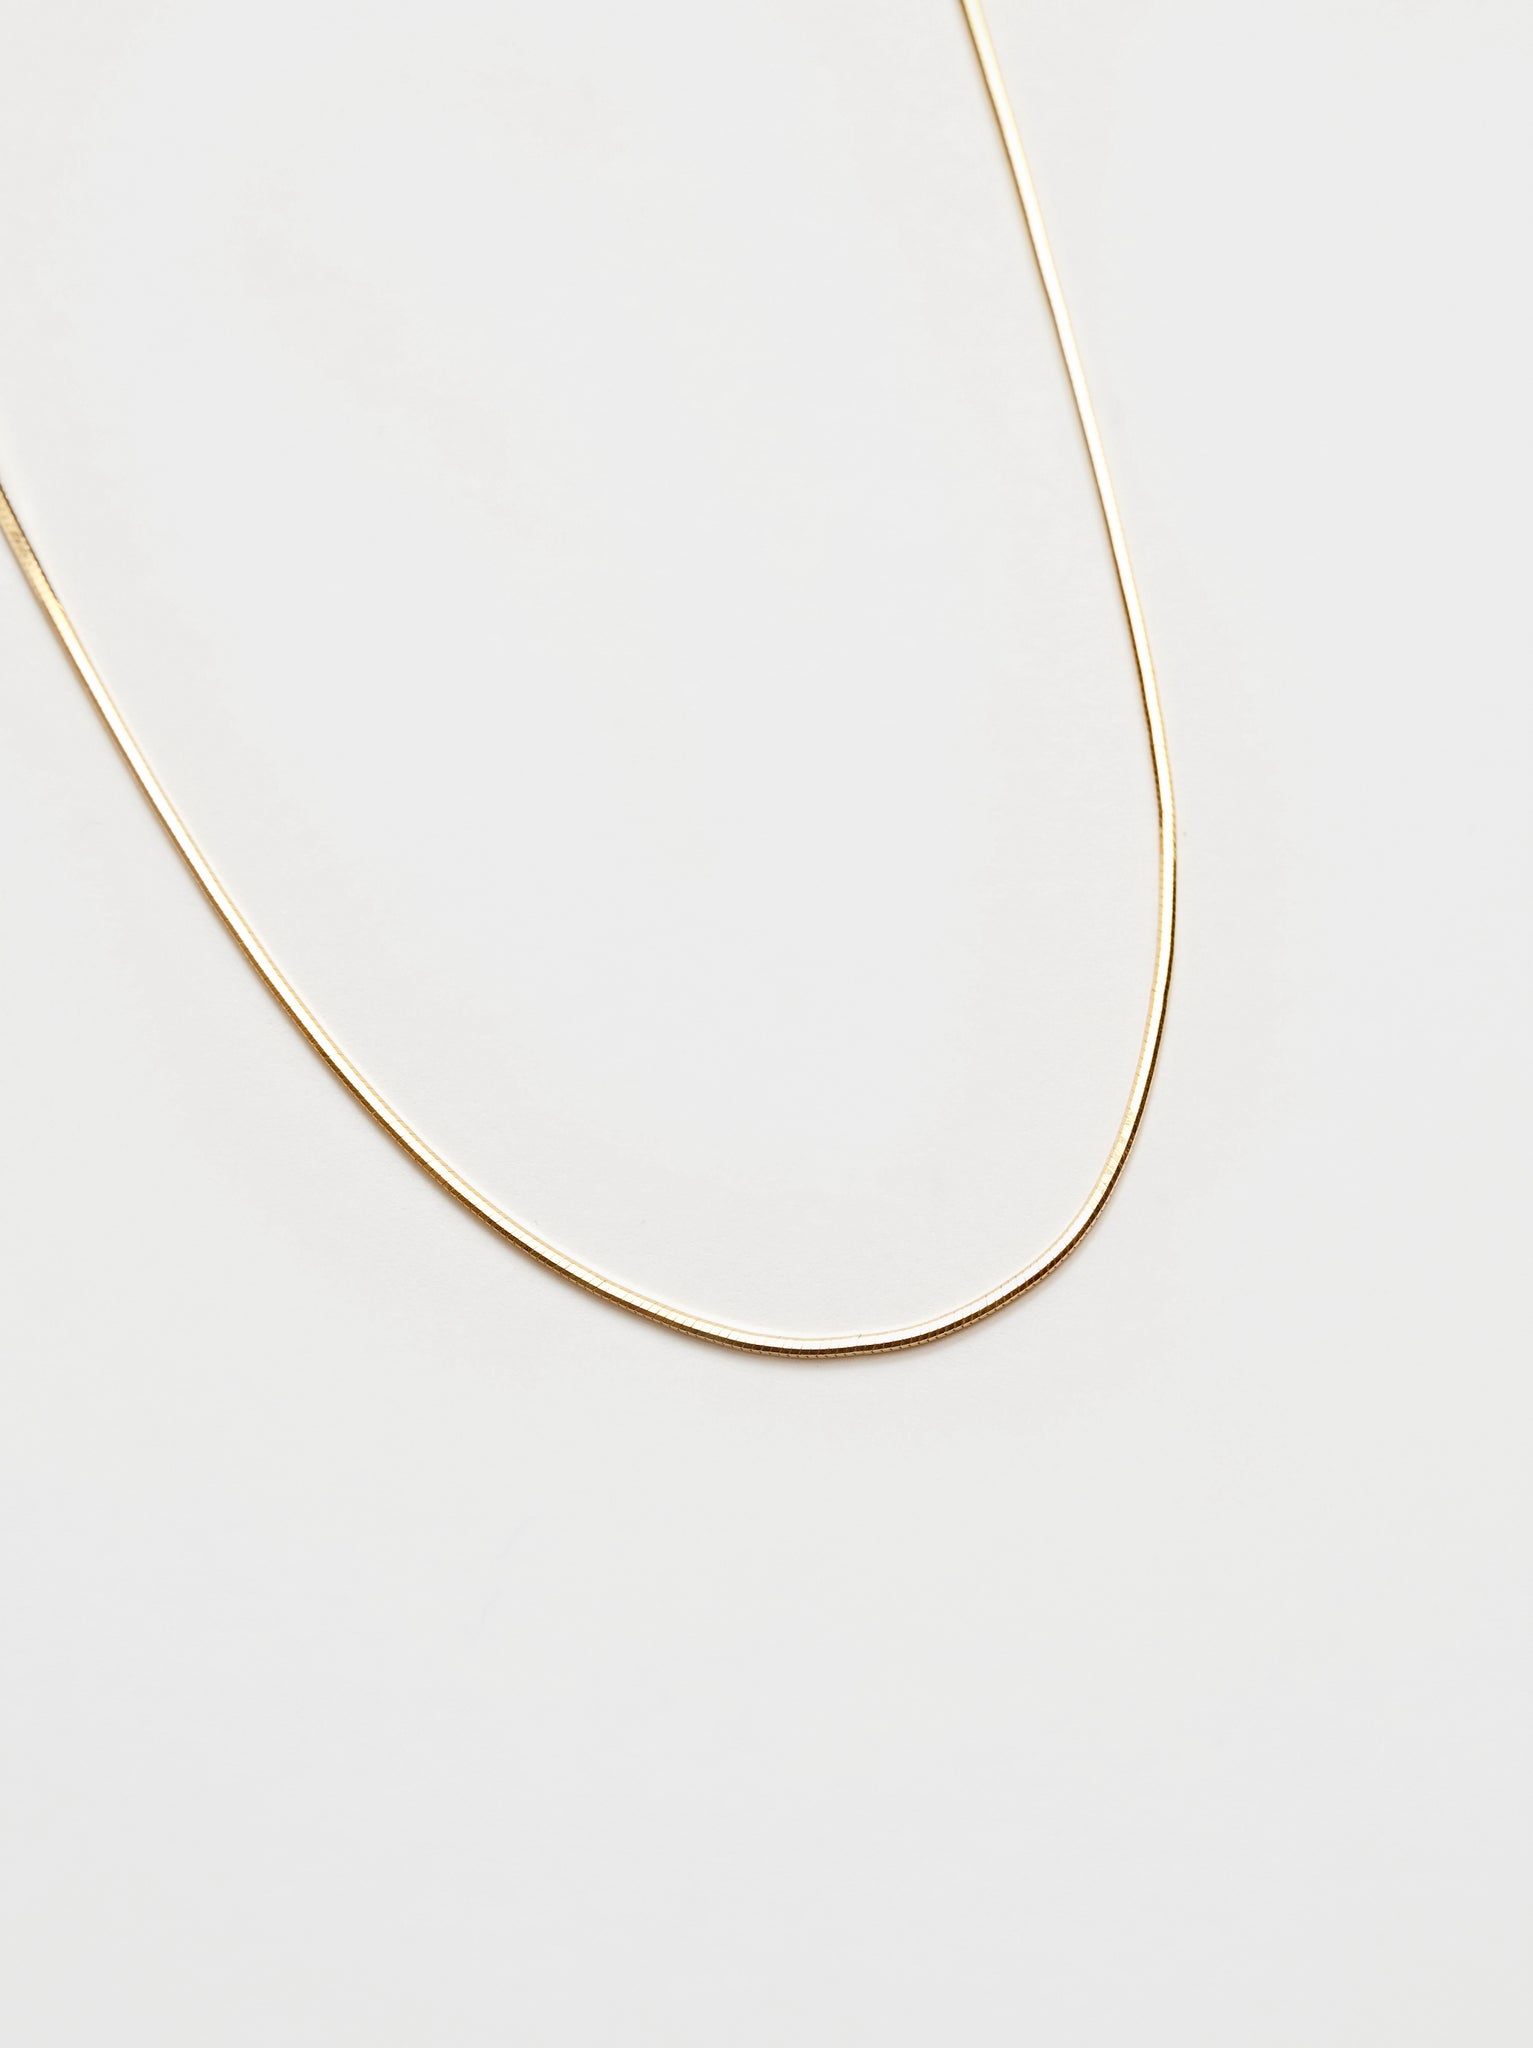 Sylvie Necklace in Gold